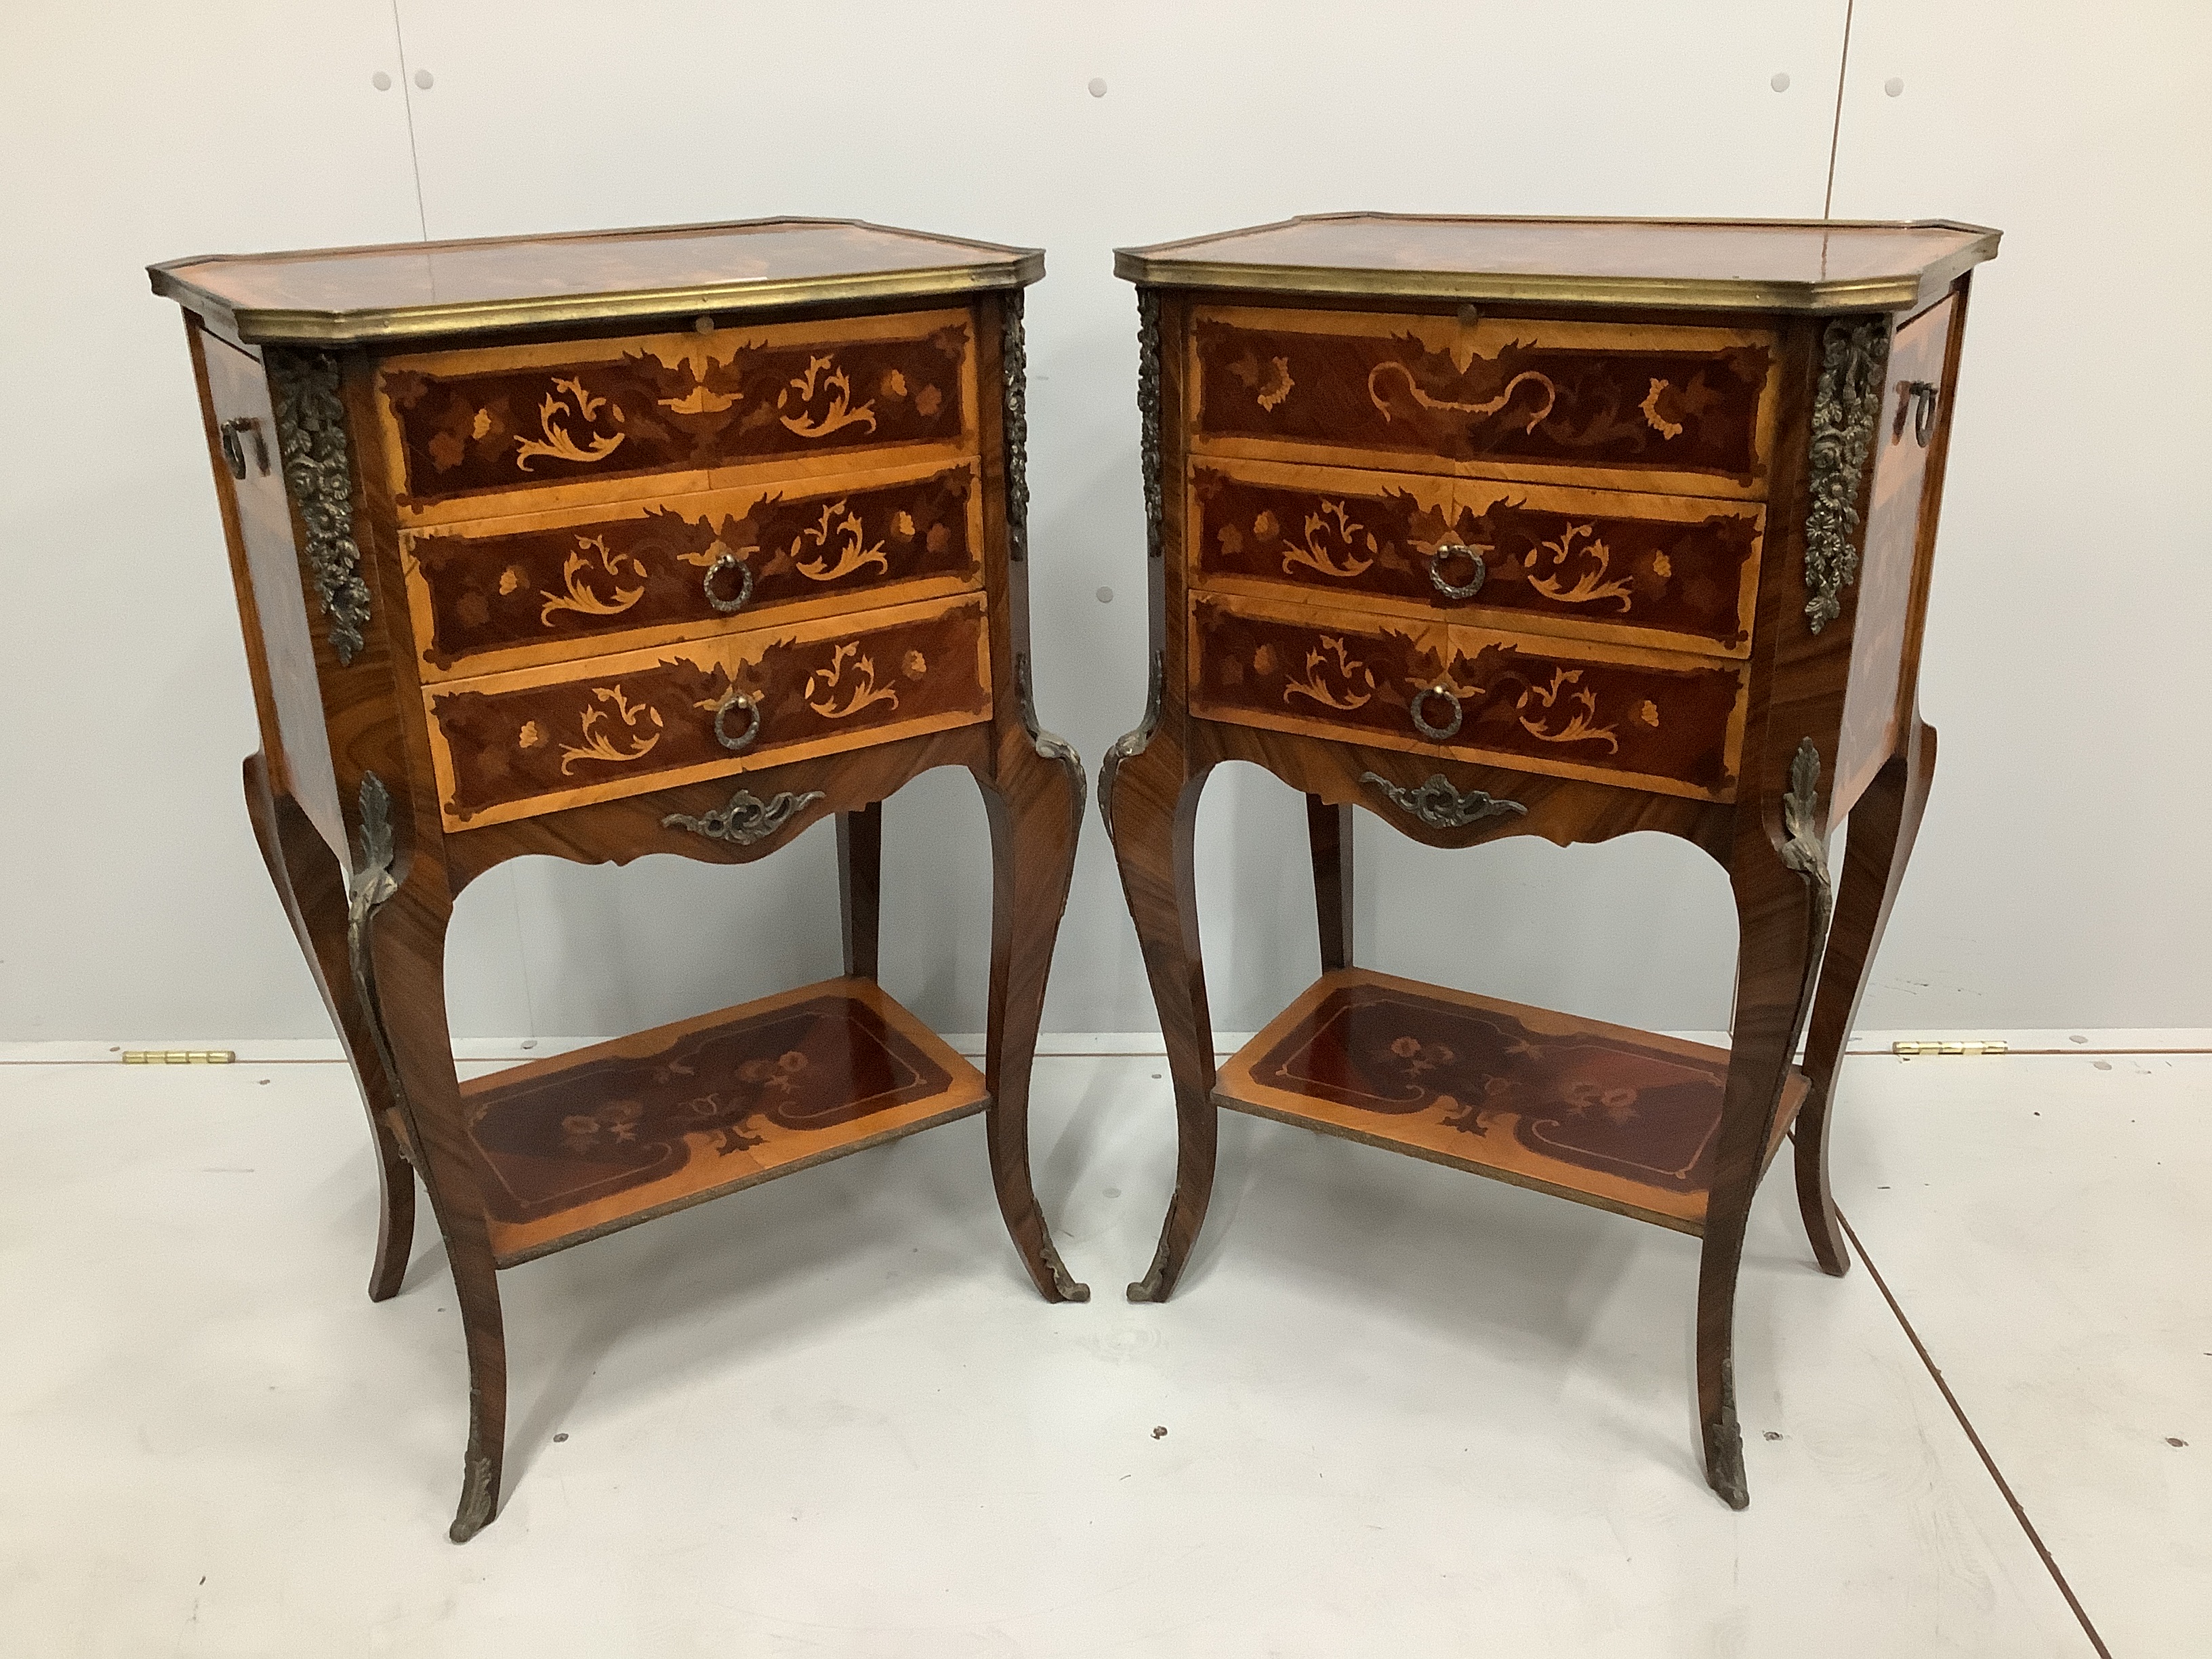 A pair of Louis XVI style marquetry inlaid gilt metal mounted kingwood three drawer bedside tables, width 51cm, depth 37cm, height 81cm